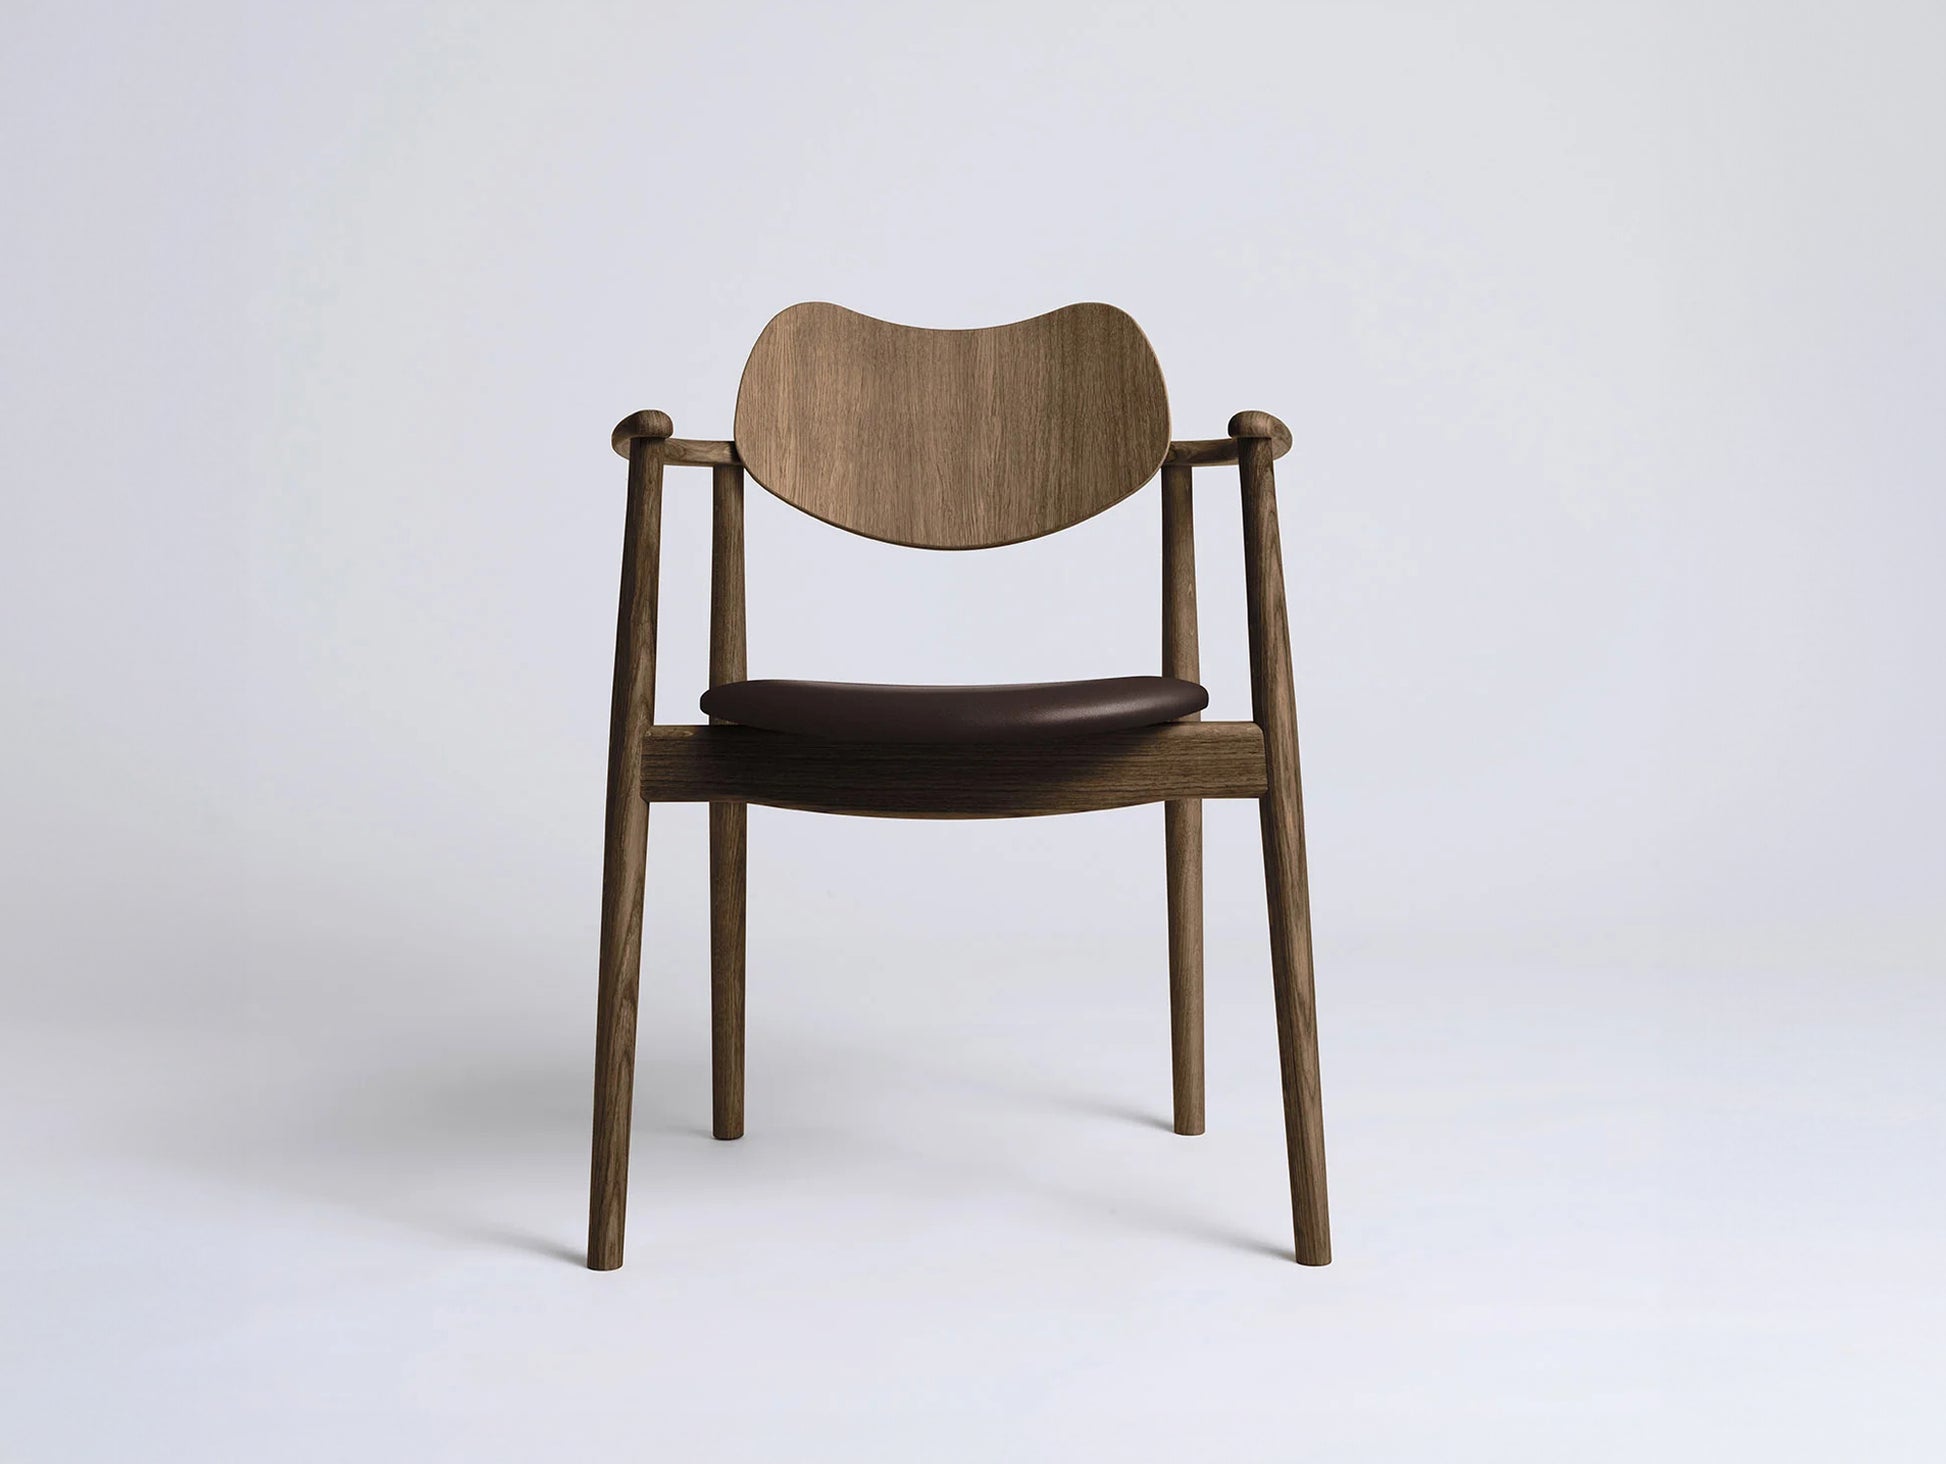 Regatta Chair Seat Upholstered by Ro Collection - Smoked Oak / Exclusive Rio Chocolate Brown Leather